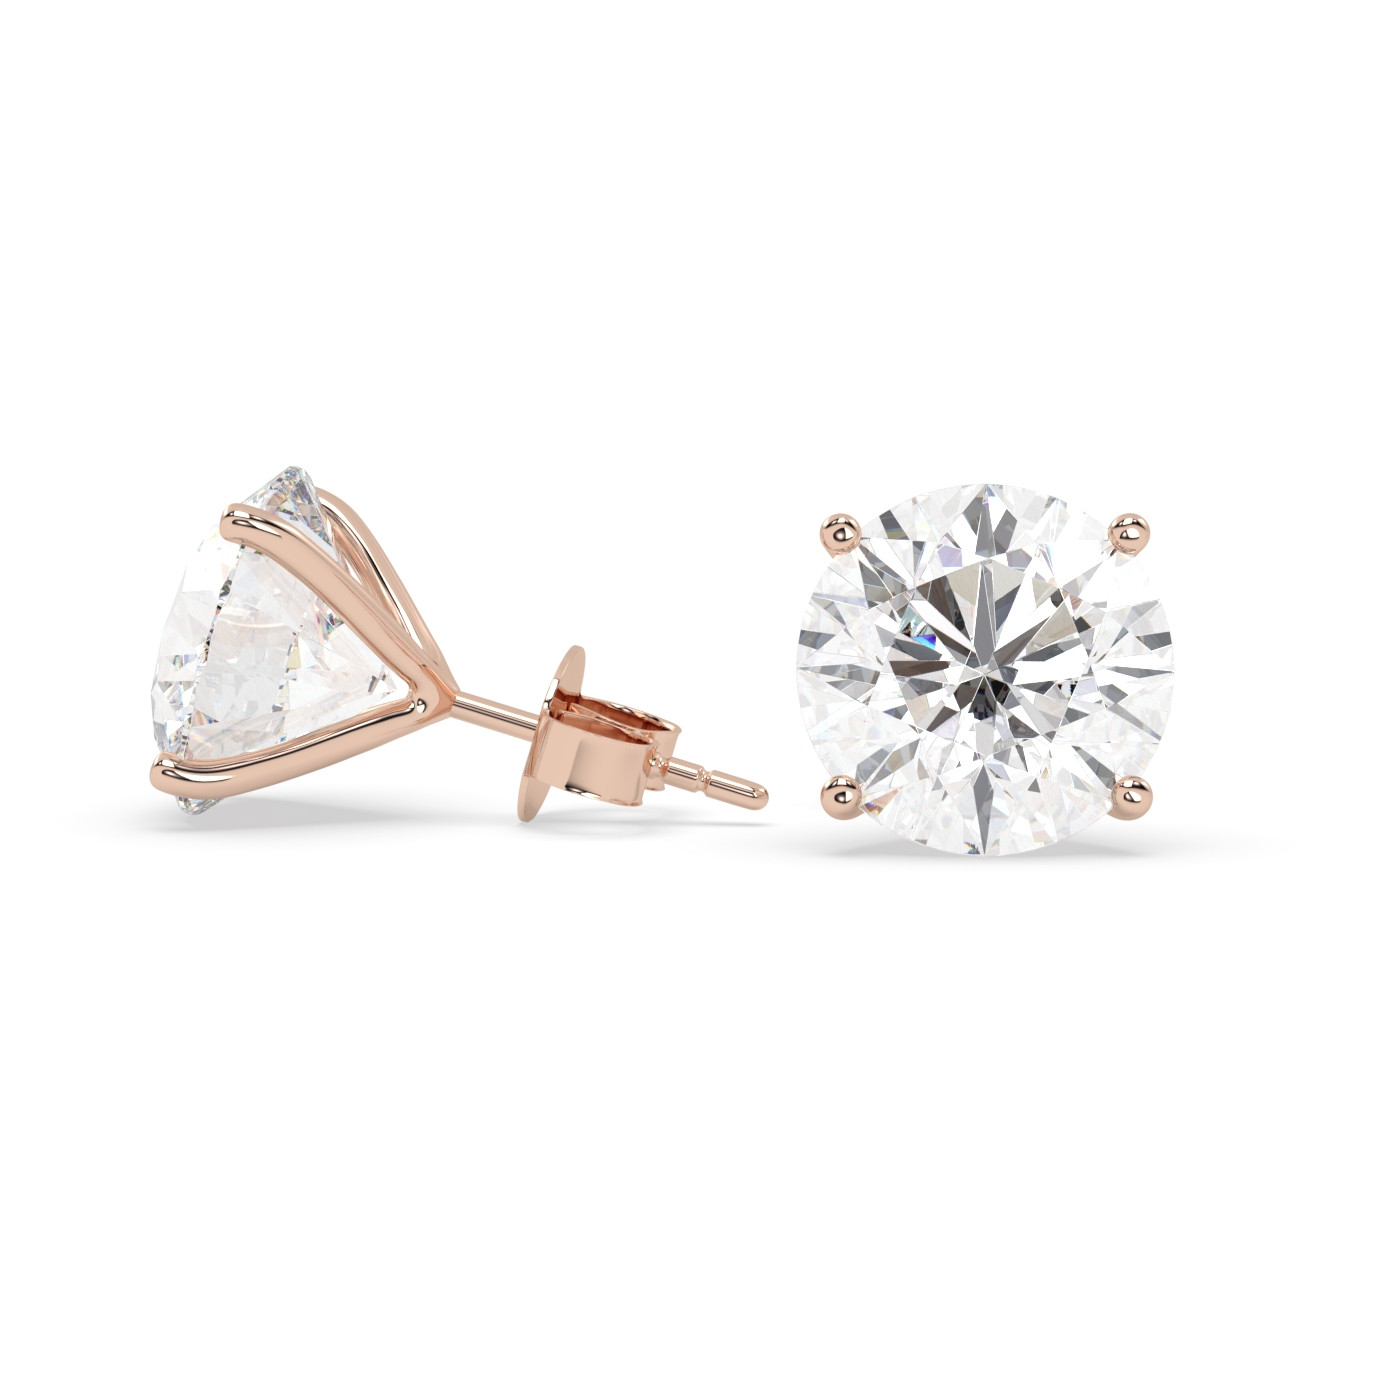 18K ROSE GOLD Round Stud Earrings with butterfly back